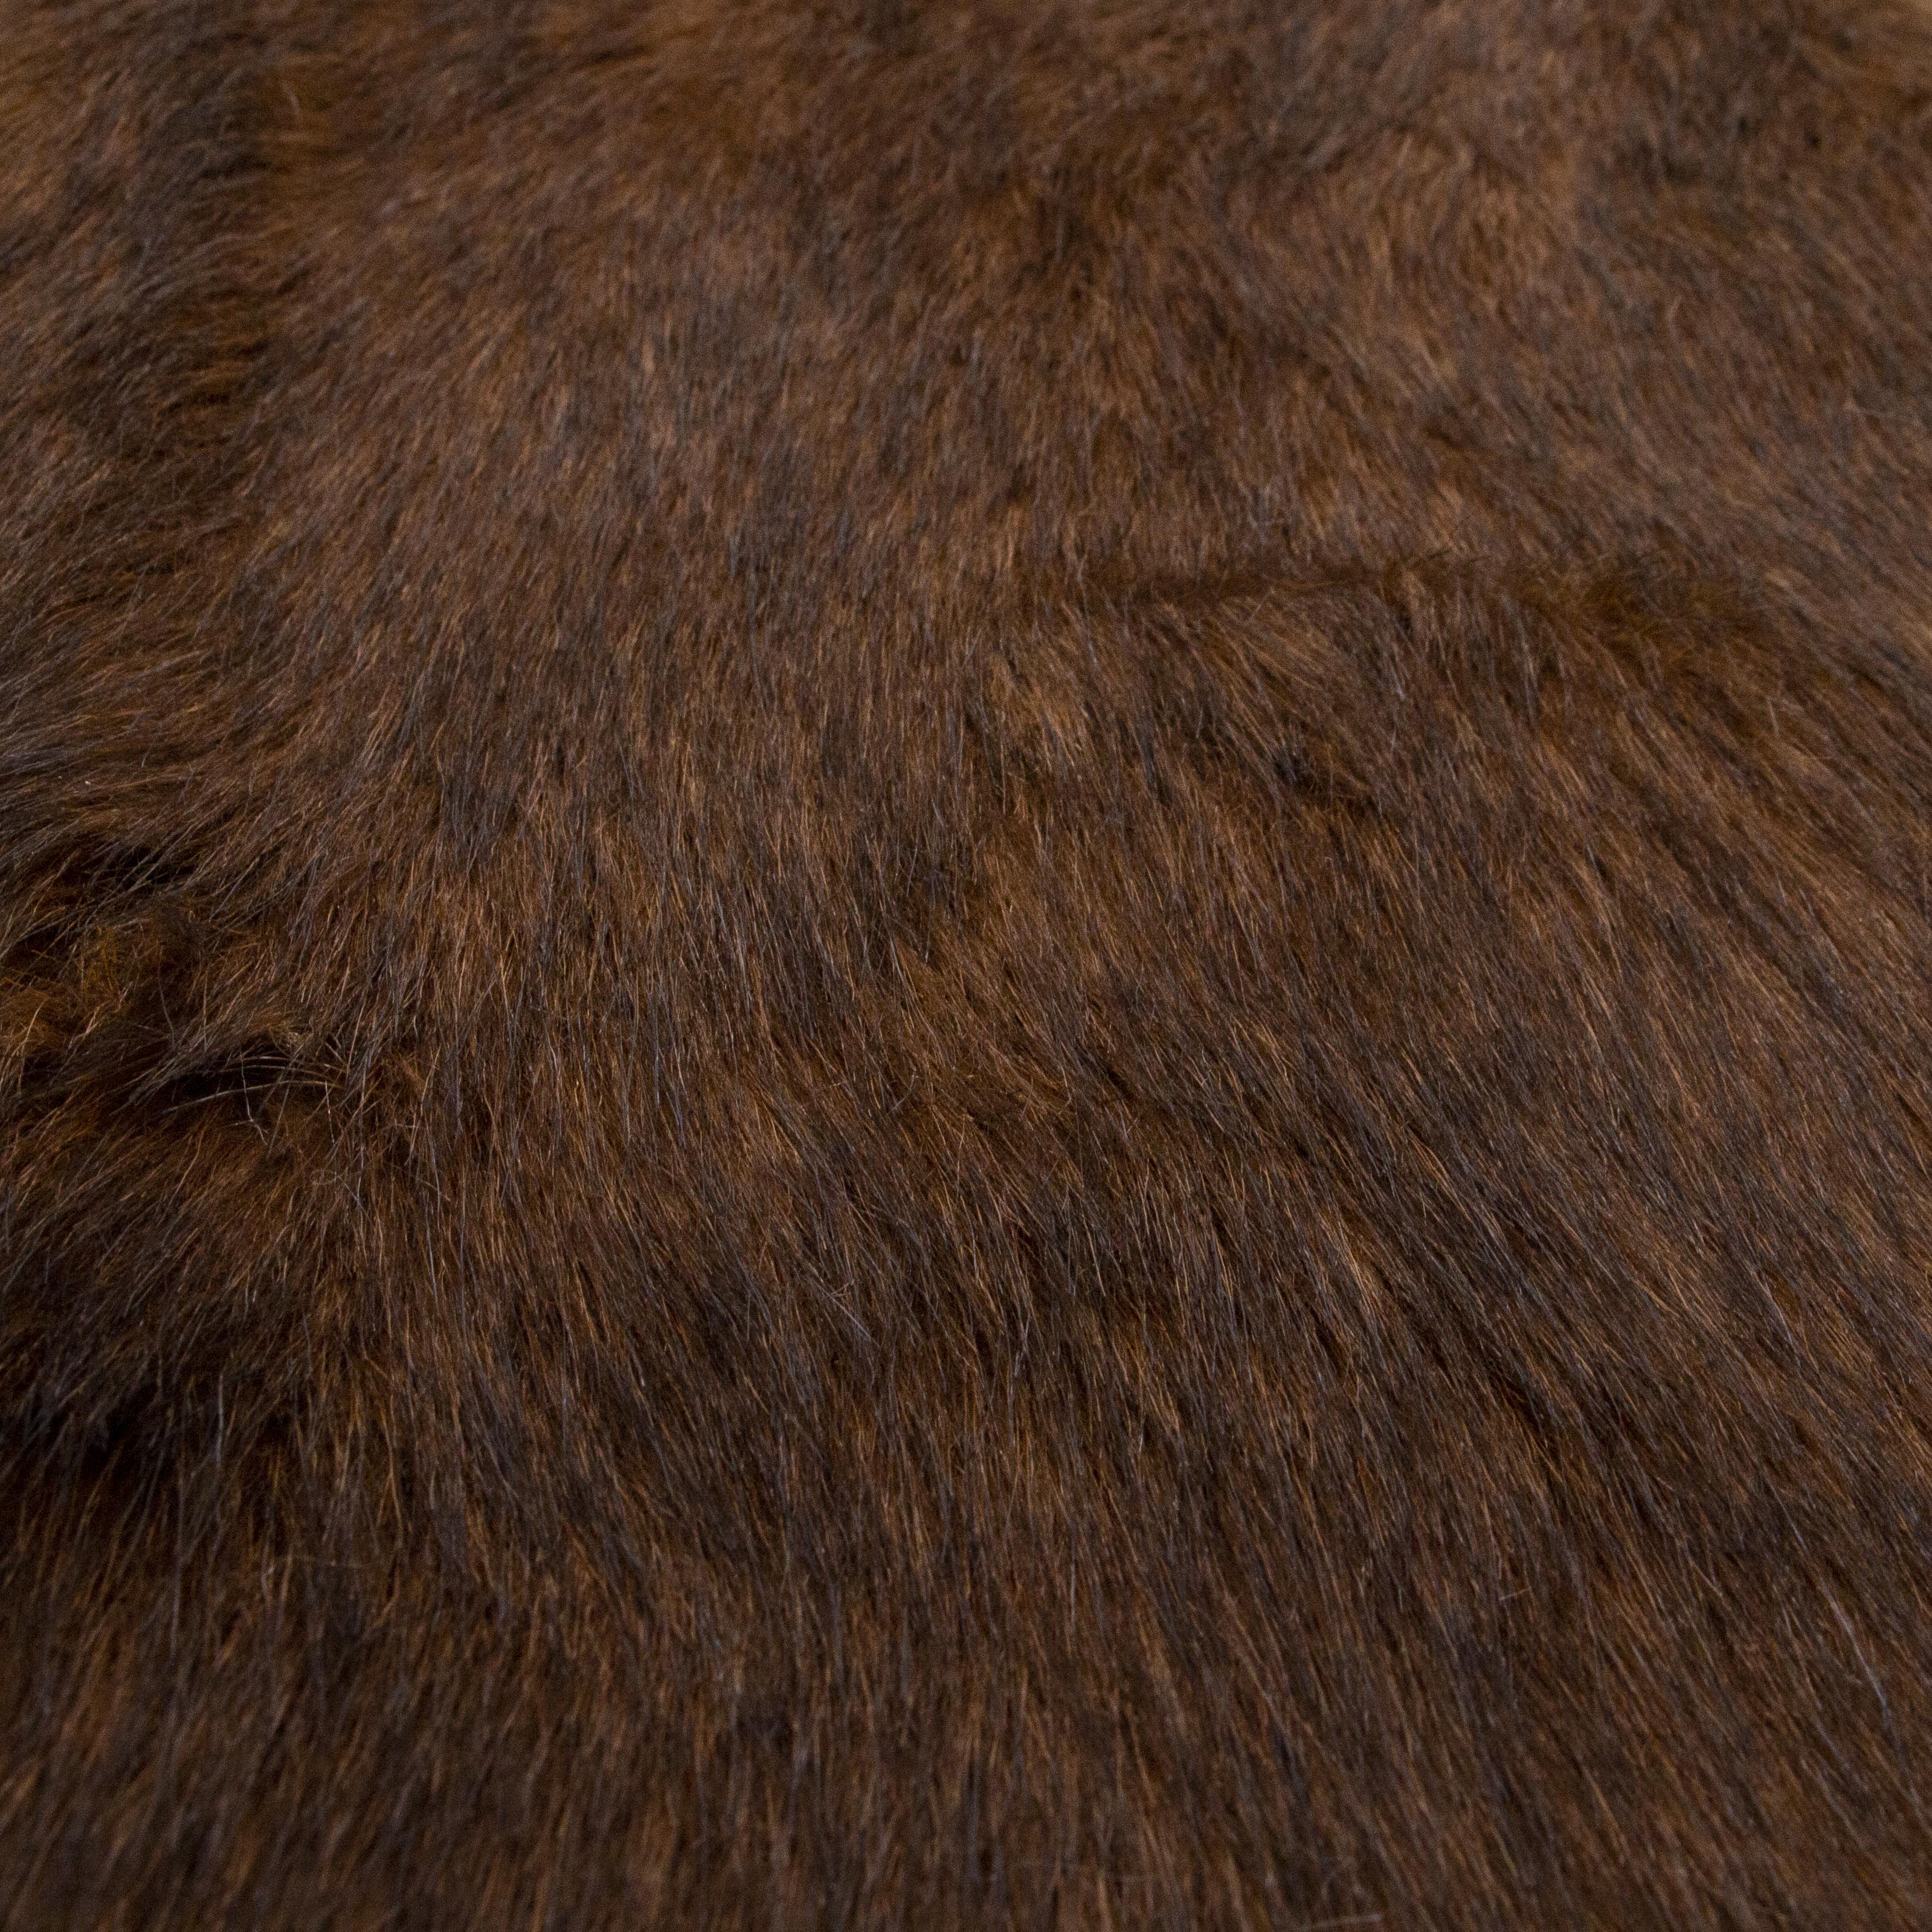 Luxury Brown Long Pile  Artificial  Faux Fur Fabric For Garment Home Textile Fabric  60MM